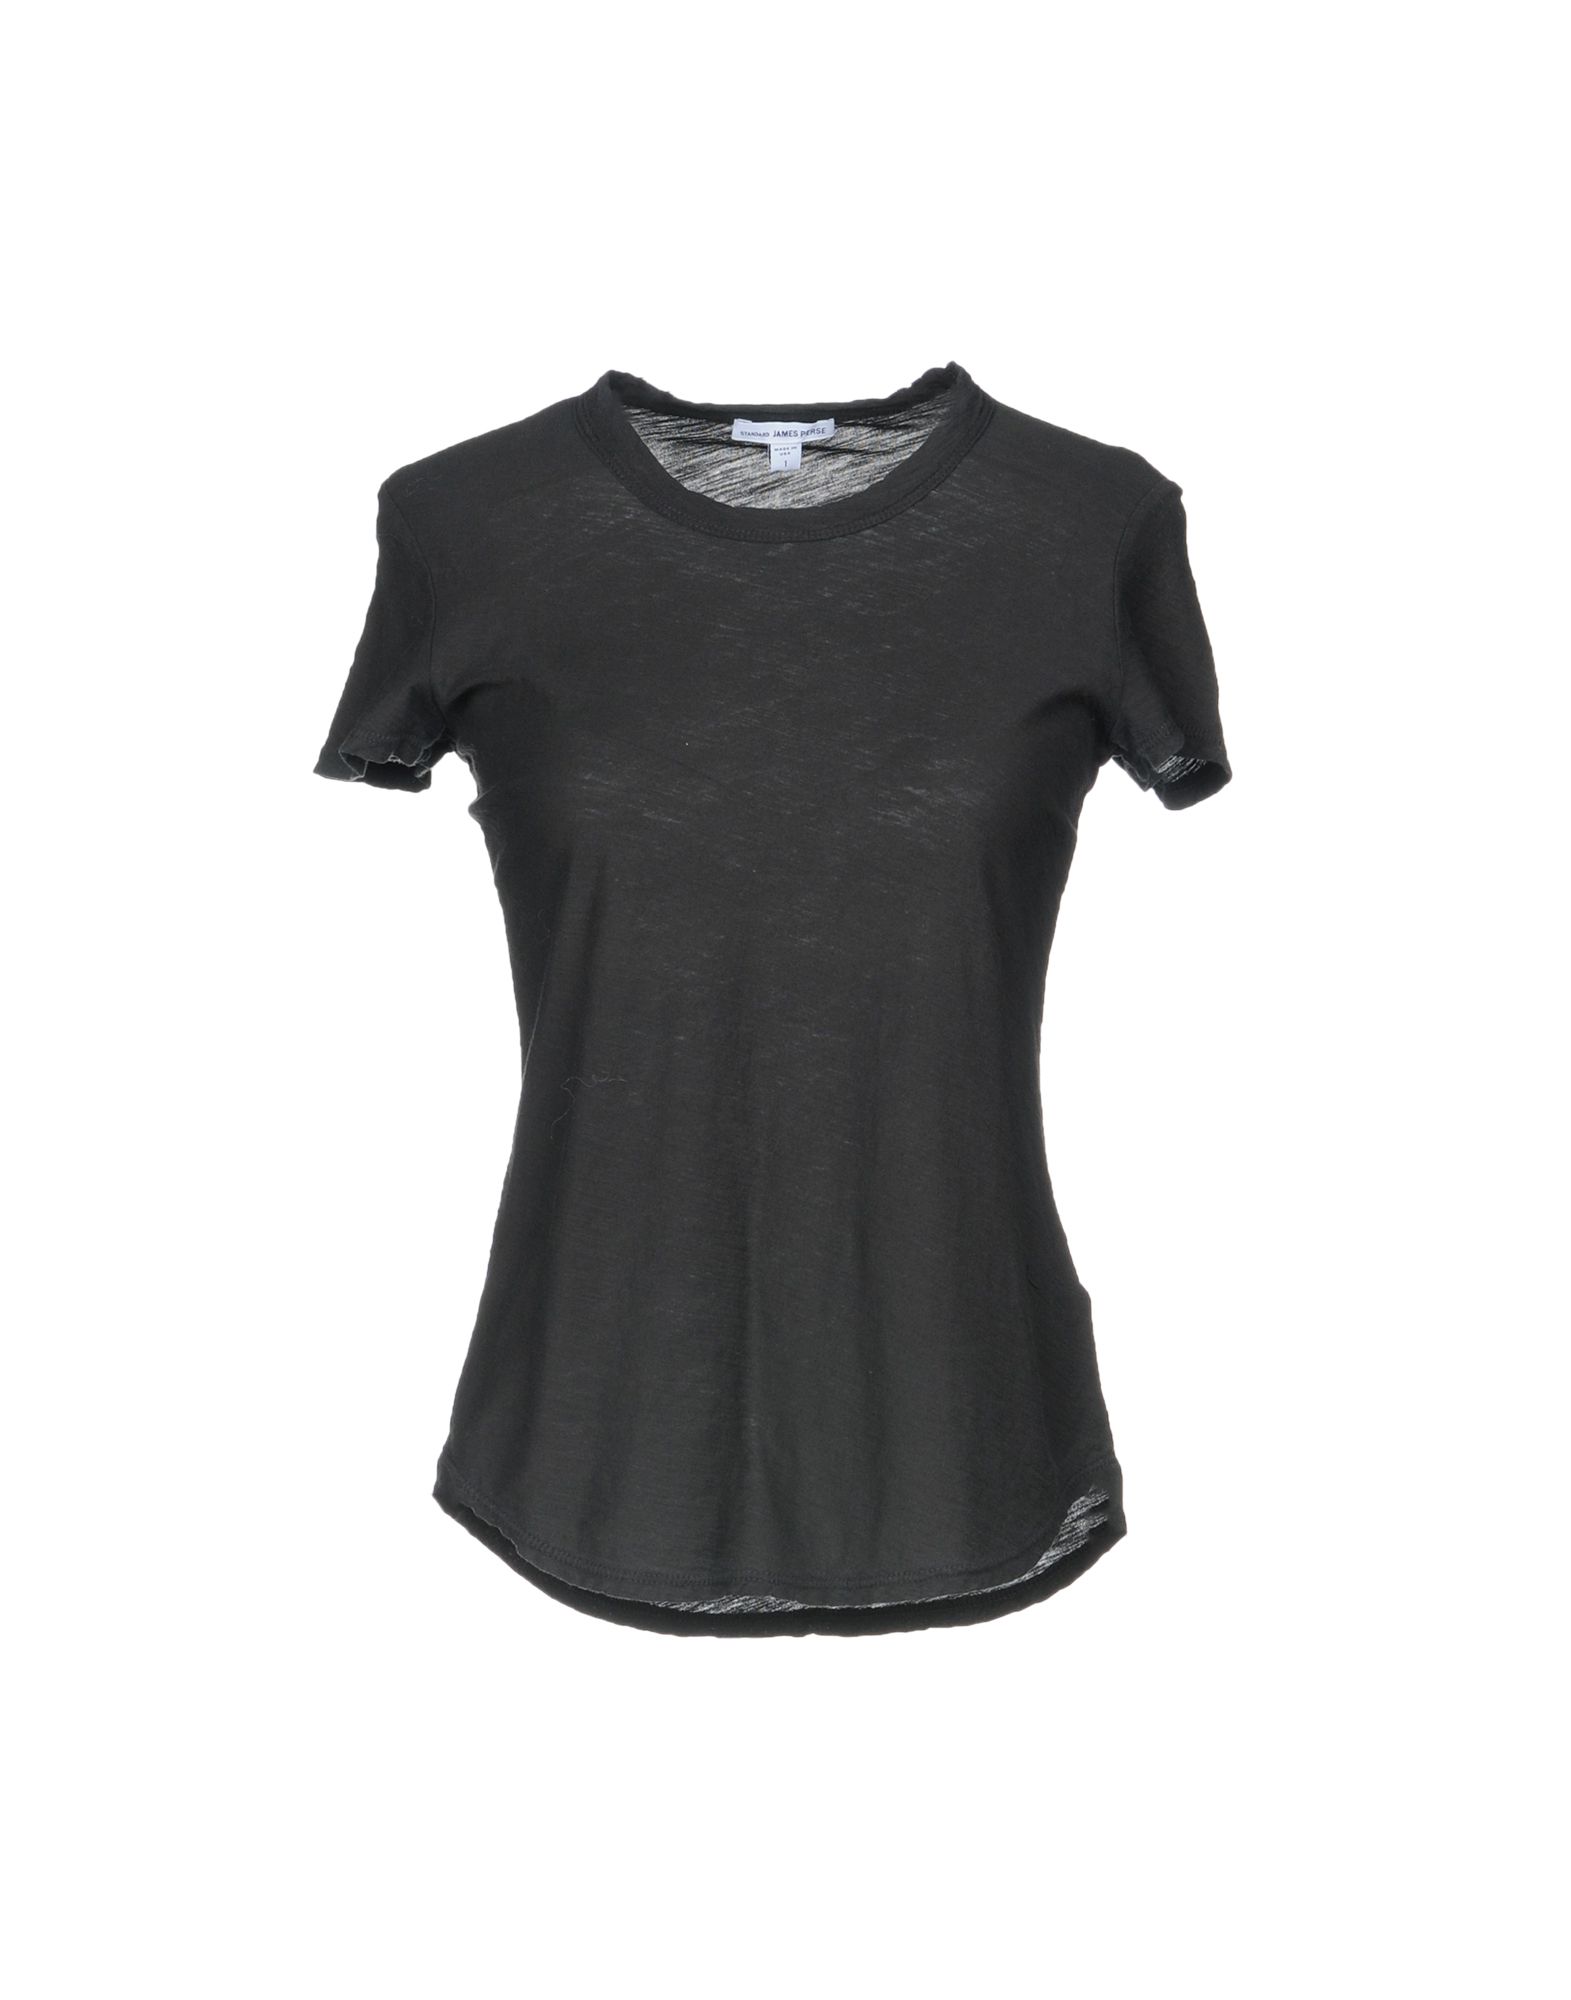 JAMES PERSE JAMES PERSE WOMAN T-SHIRT LEAD SIZE 3 SUPIMA